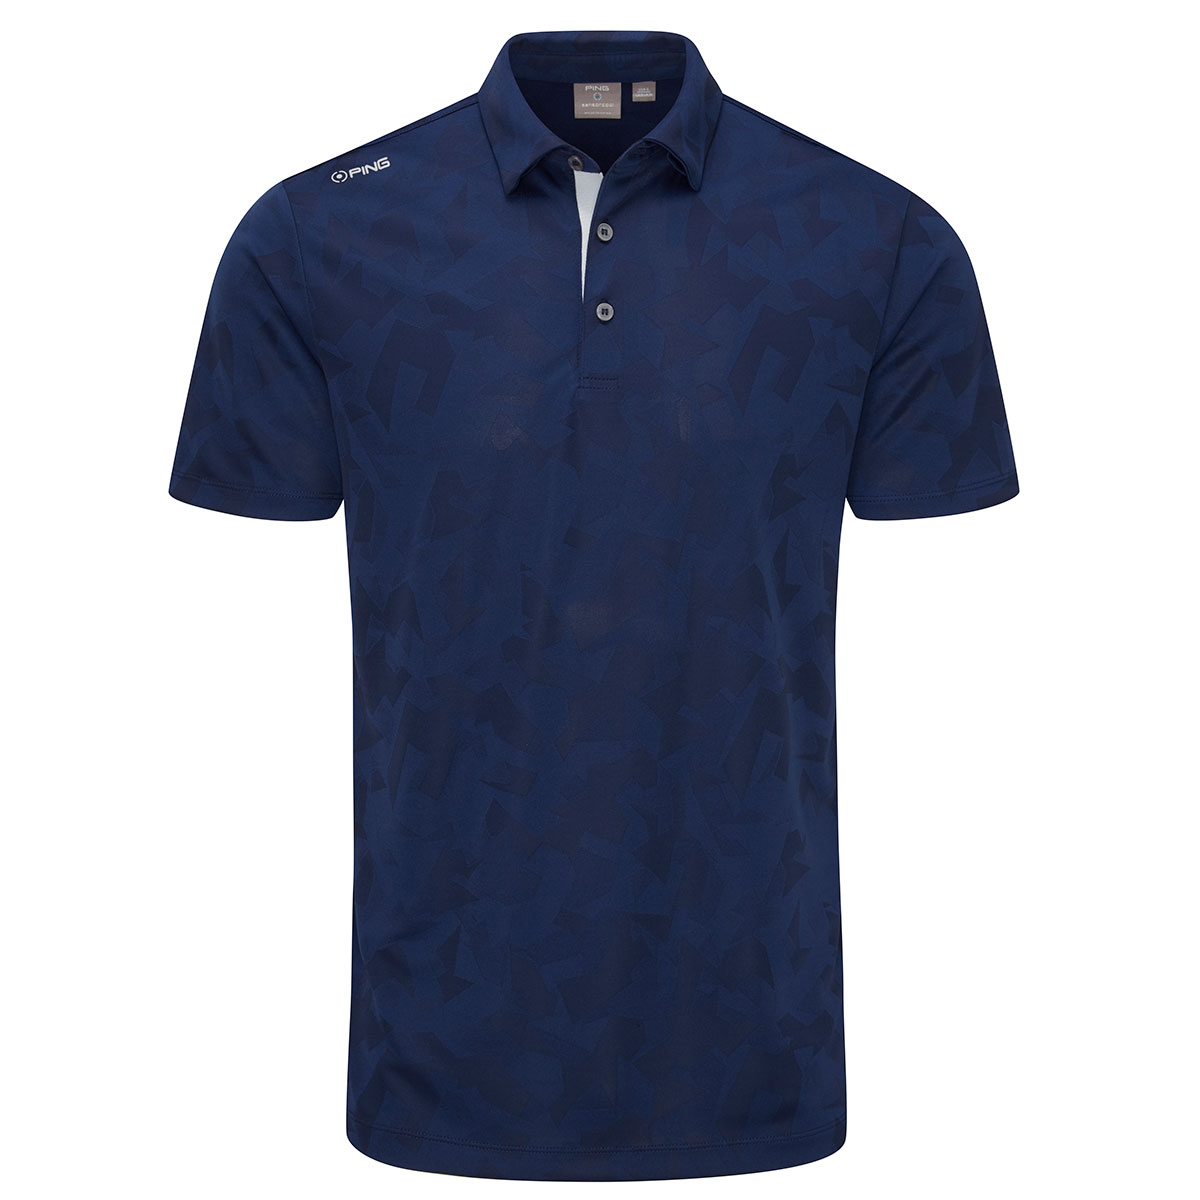 PING Men's Romy Stretch Golf Polo Shirt from american golf